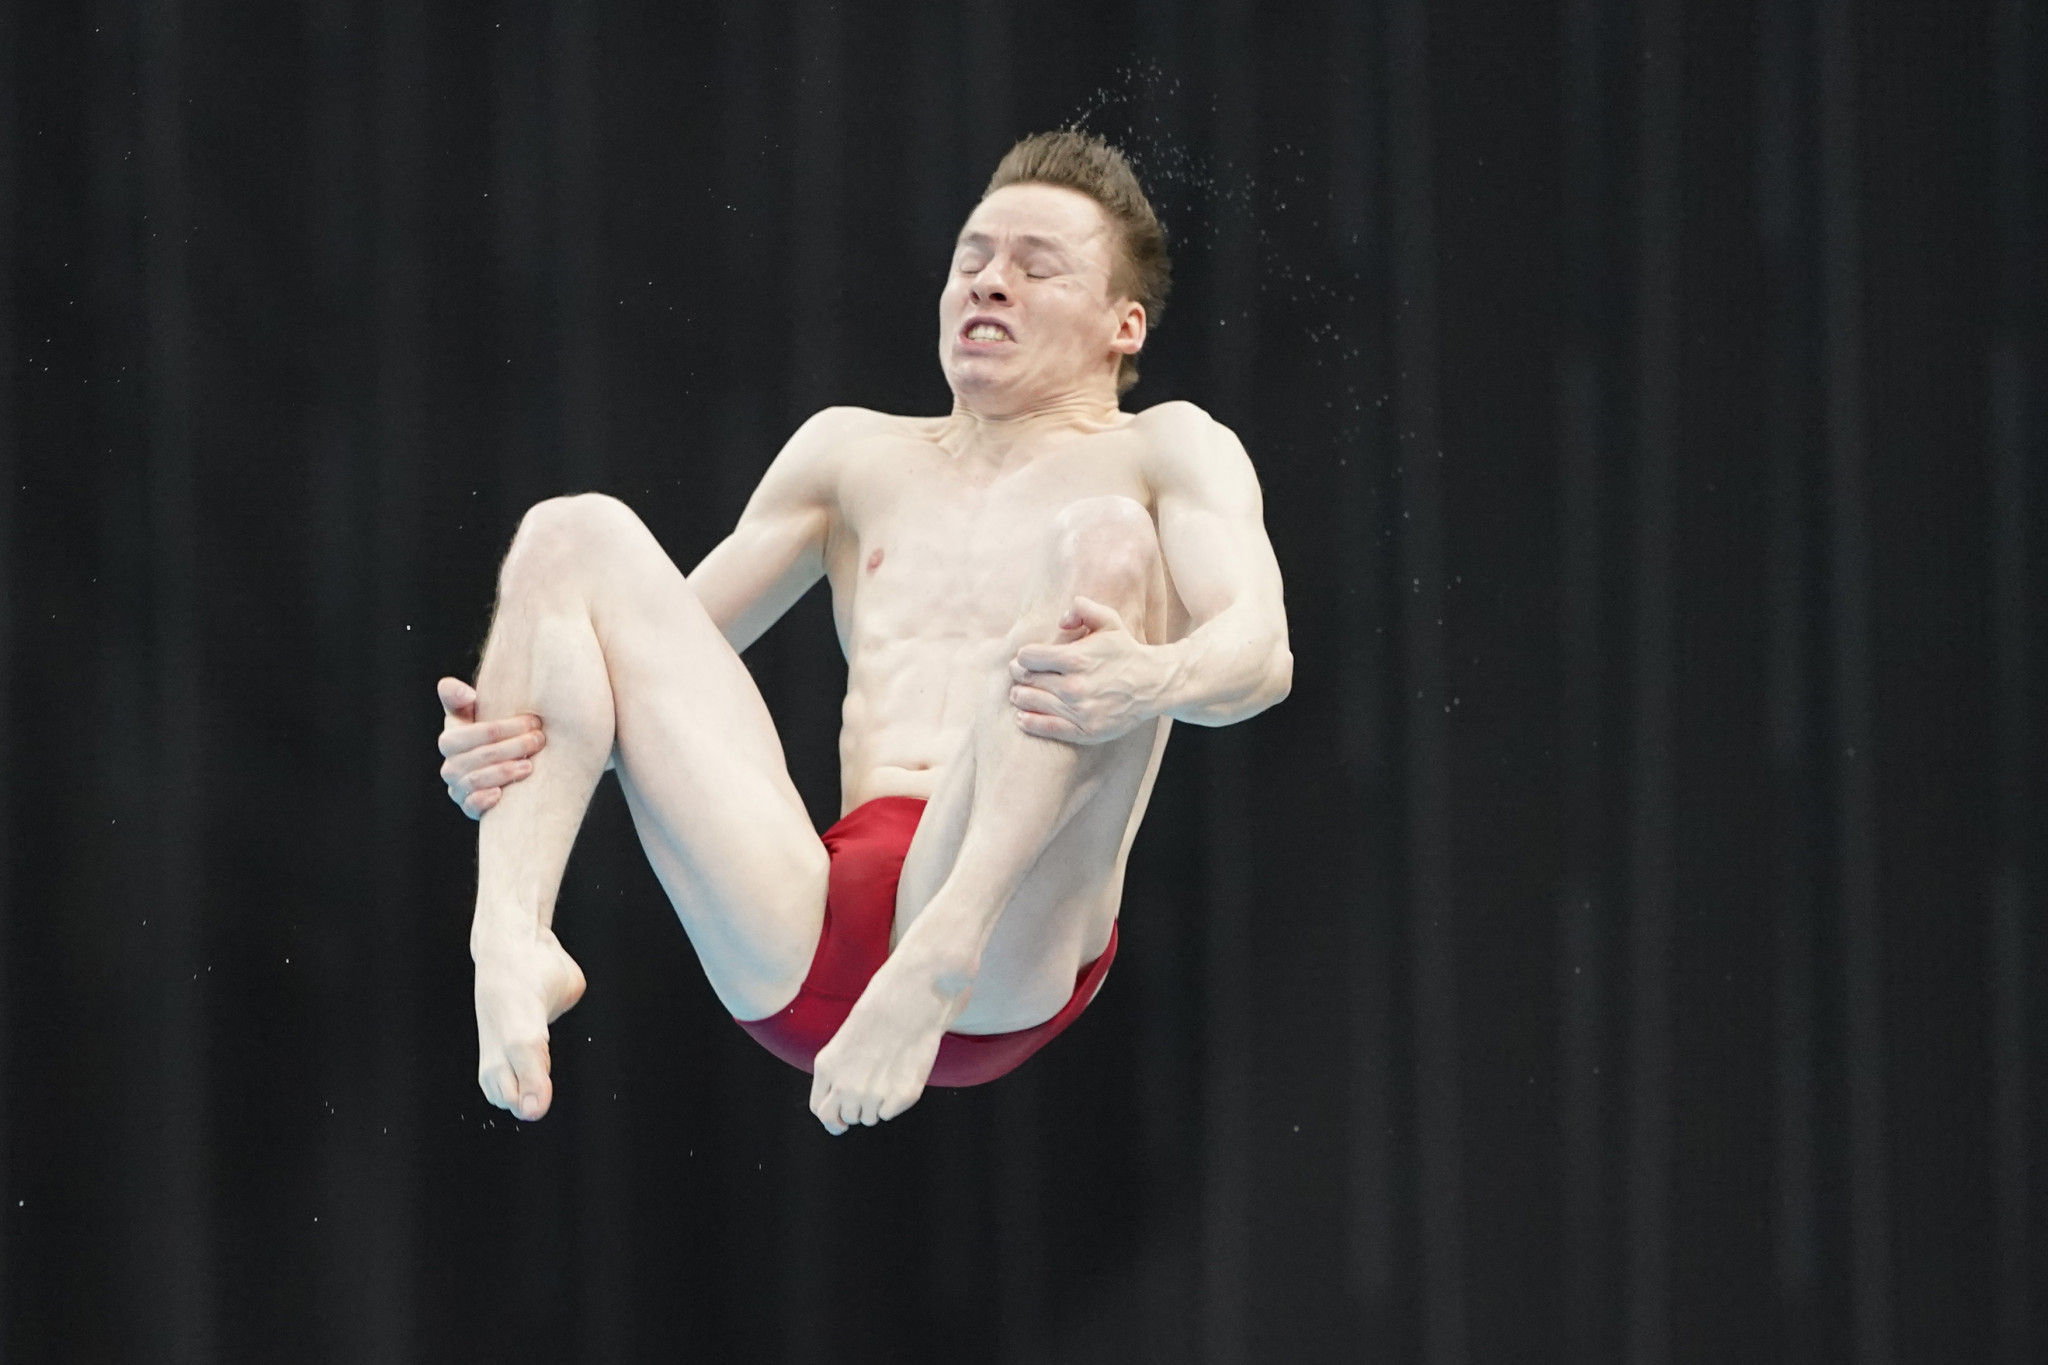 Germany’s Wolfram halts British clean sweep as Goodfellow falters at FINA Diving World Cup in Tokyo